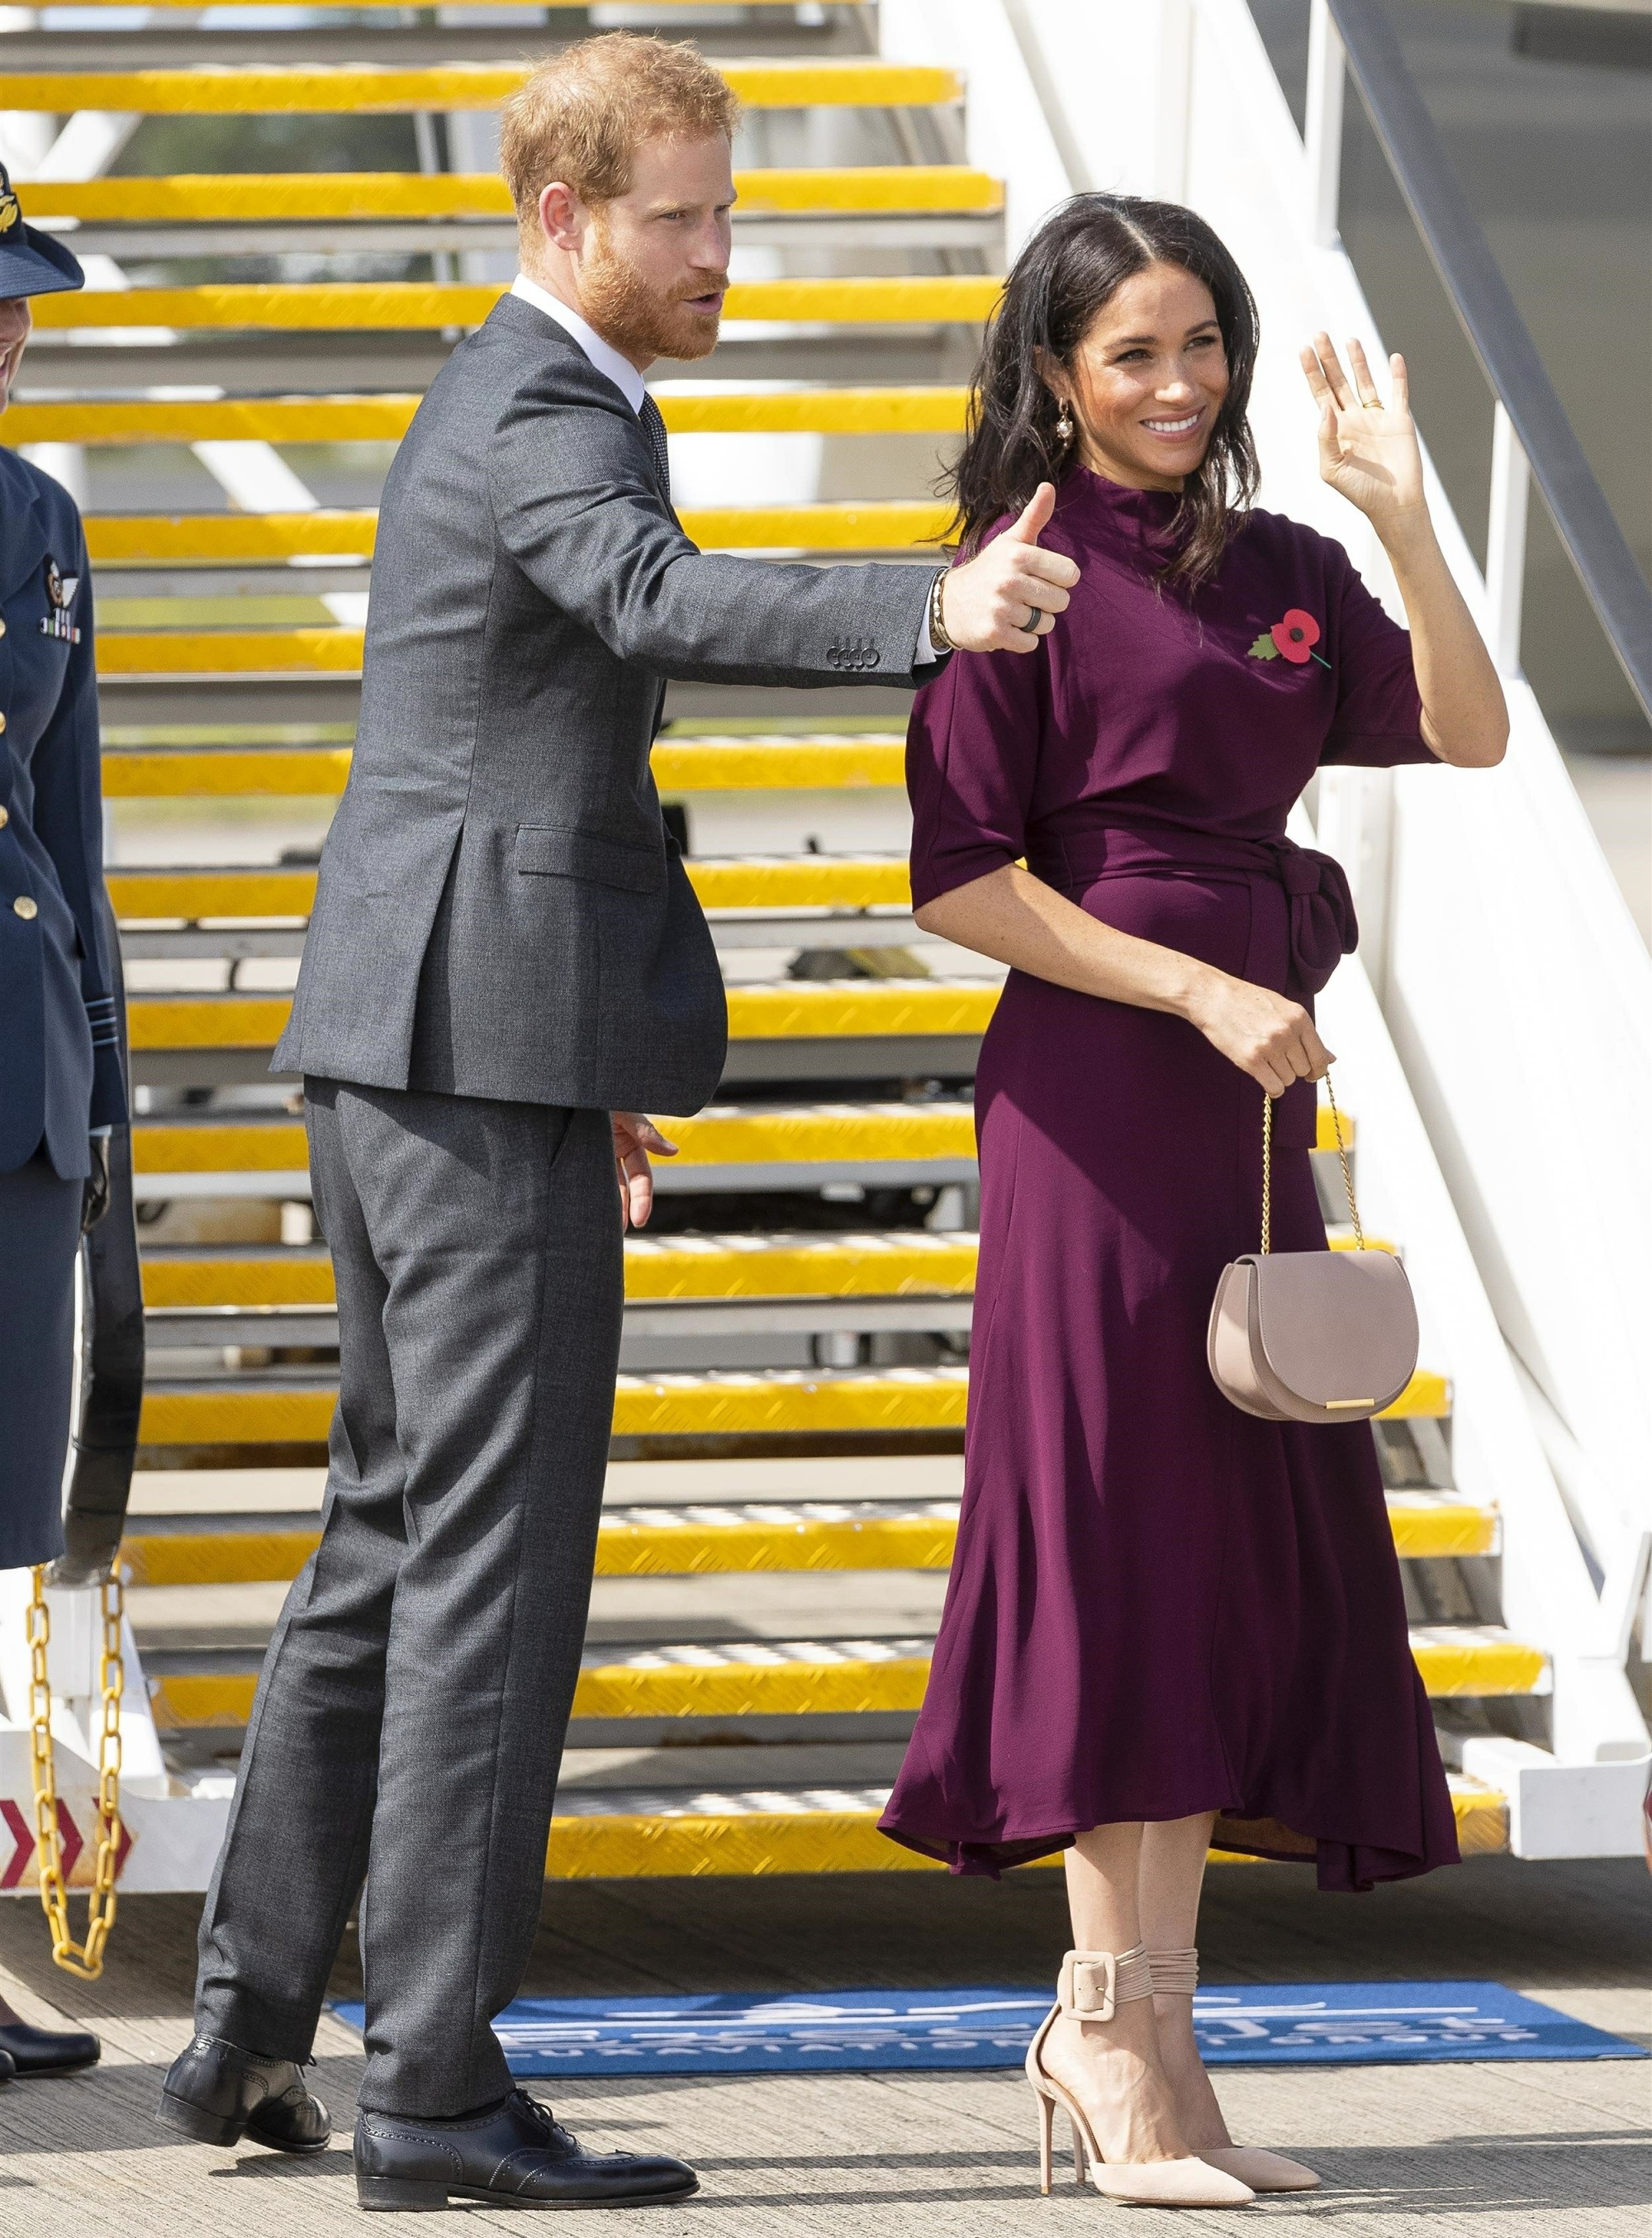 The Duke and Duchess of Sussex board a flight to New Zealand